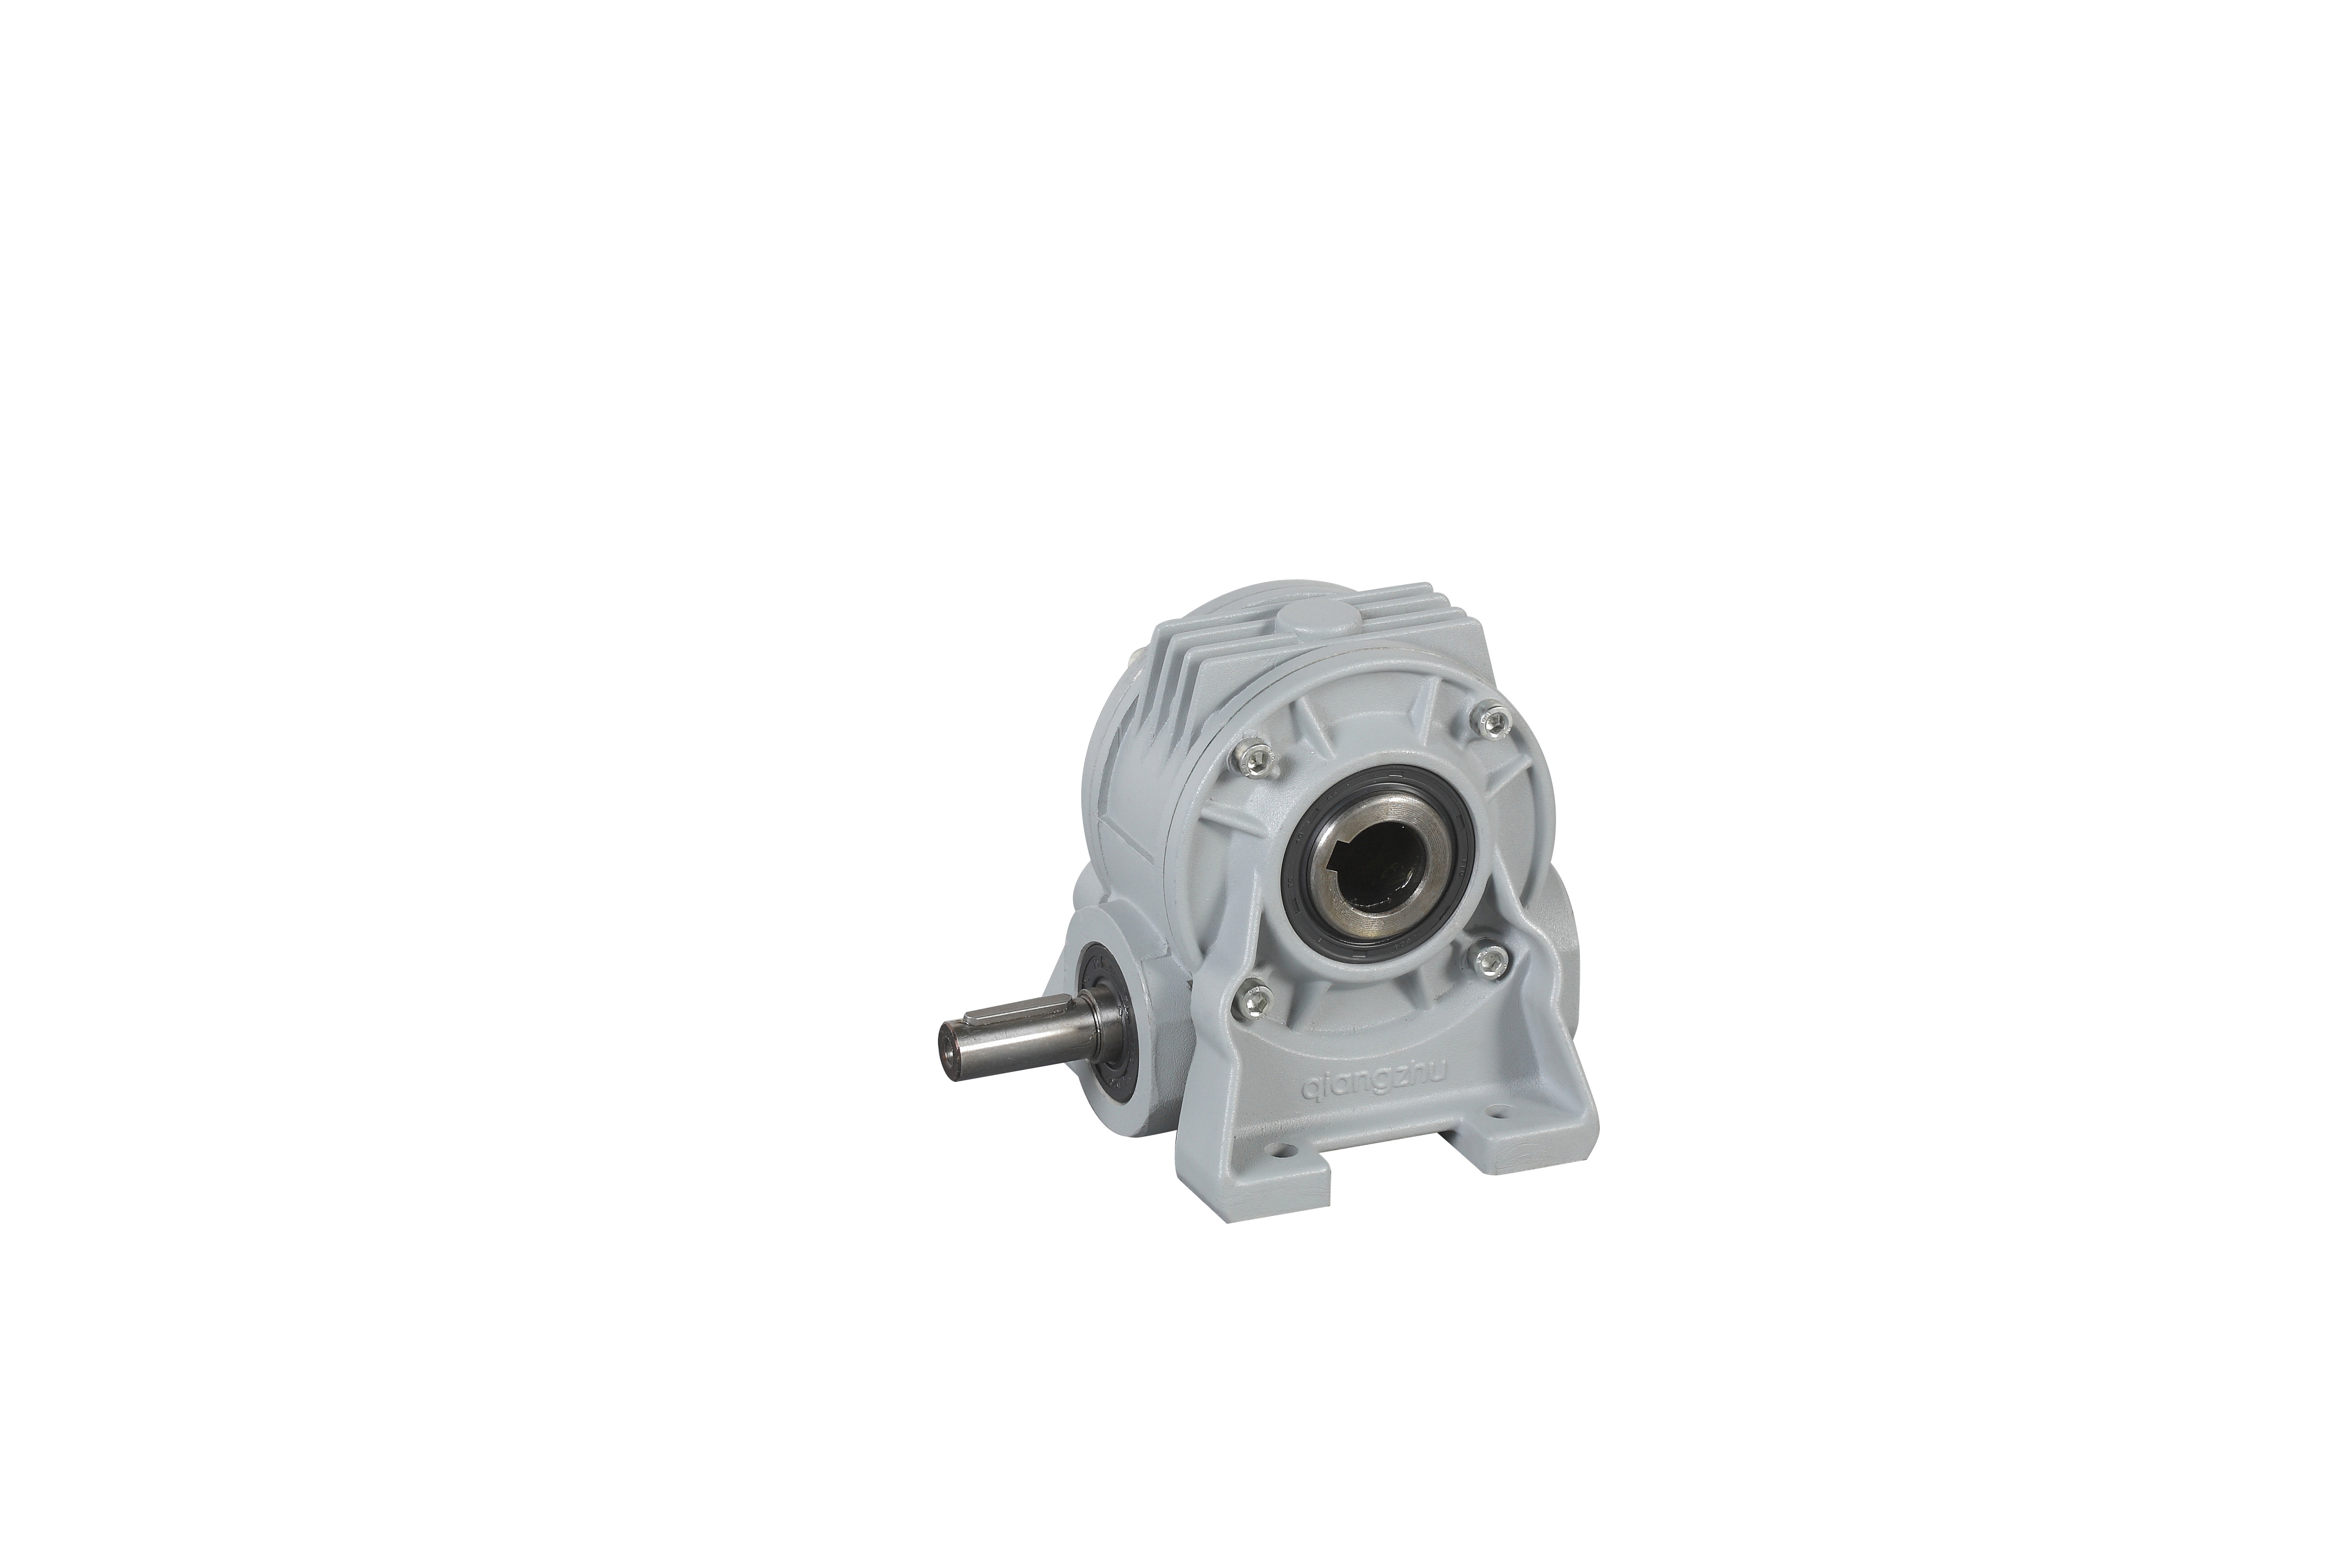 VfF Type Reduction Gearbox Motor Series Reduction Transmission